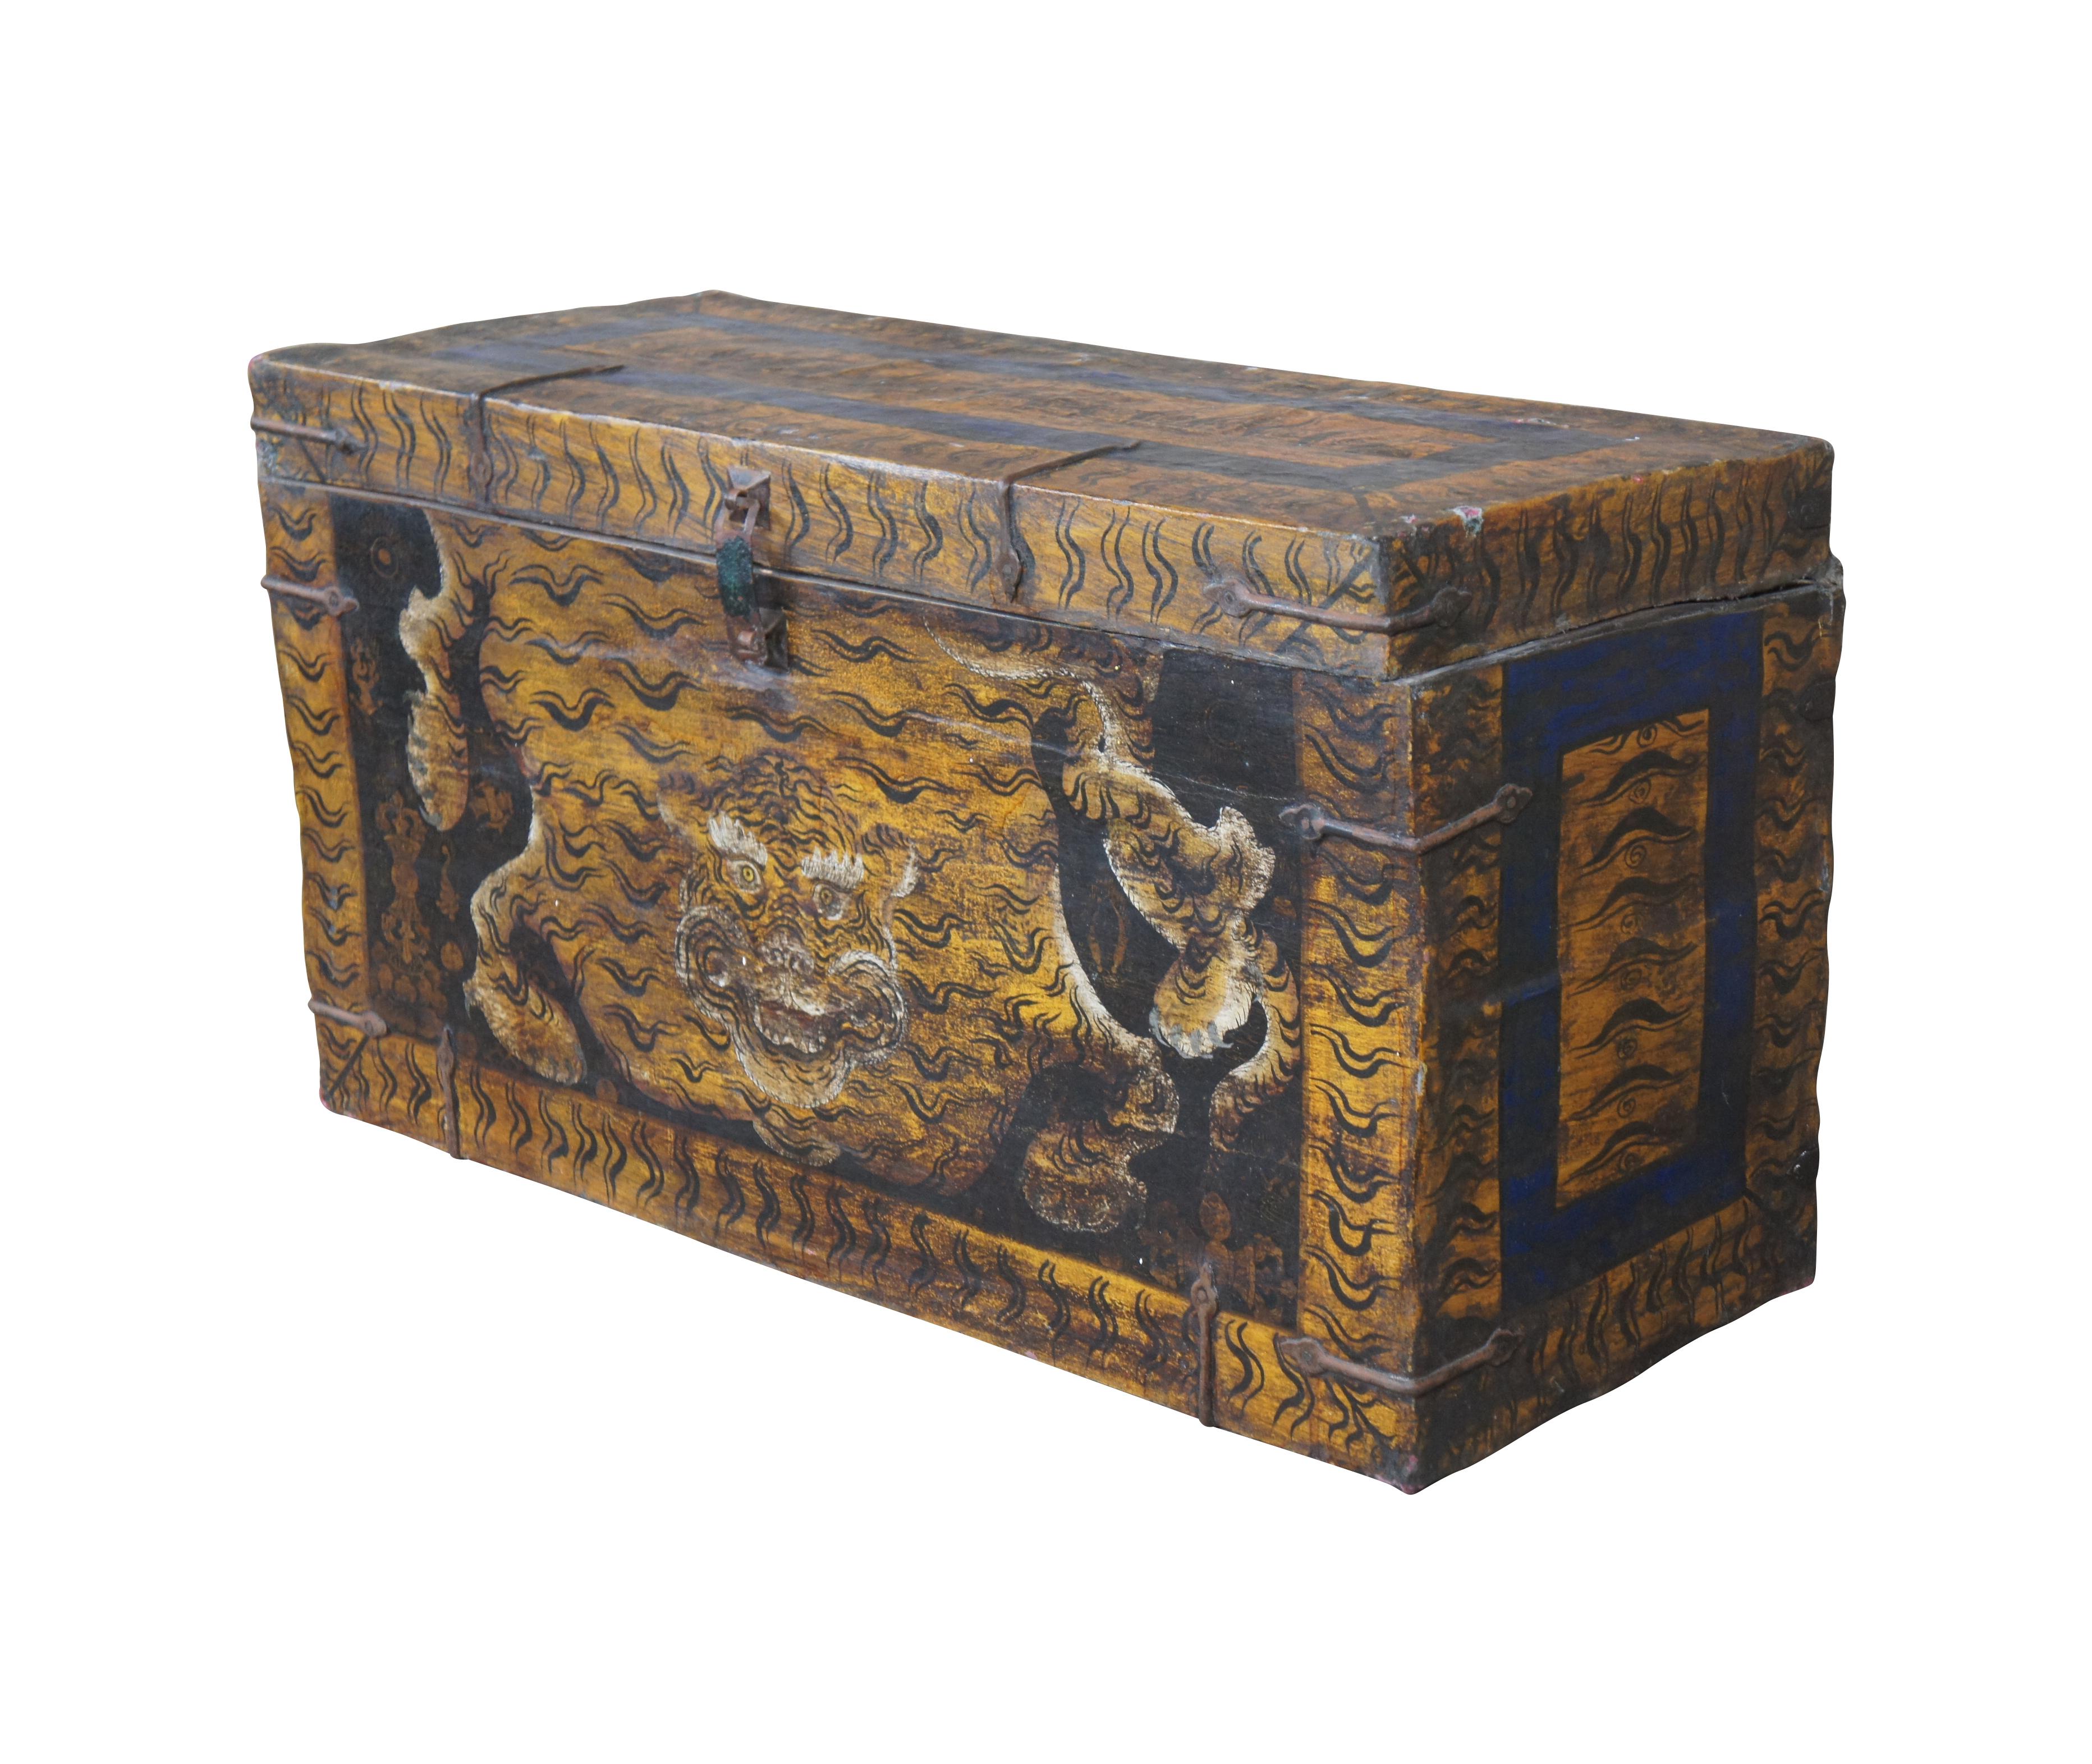 An impressive Tibetan storage from the first quarter of the 20th century. A wooden frame richly finished with lacquered leather hide and banded iron hardware. The front is hand-painted with a tiger at the center and framed in tiger stripes. The